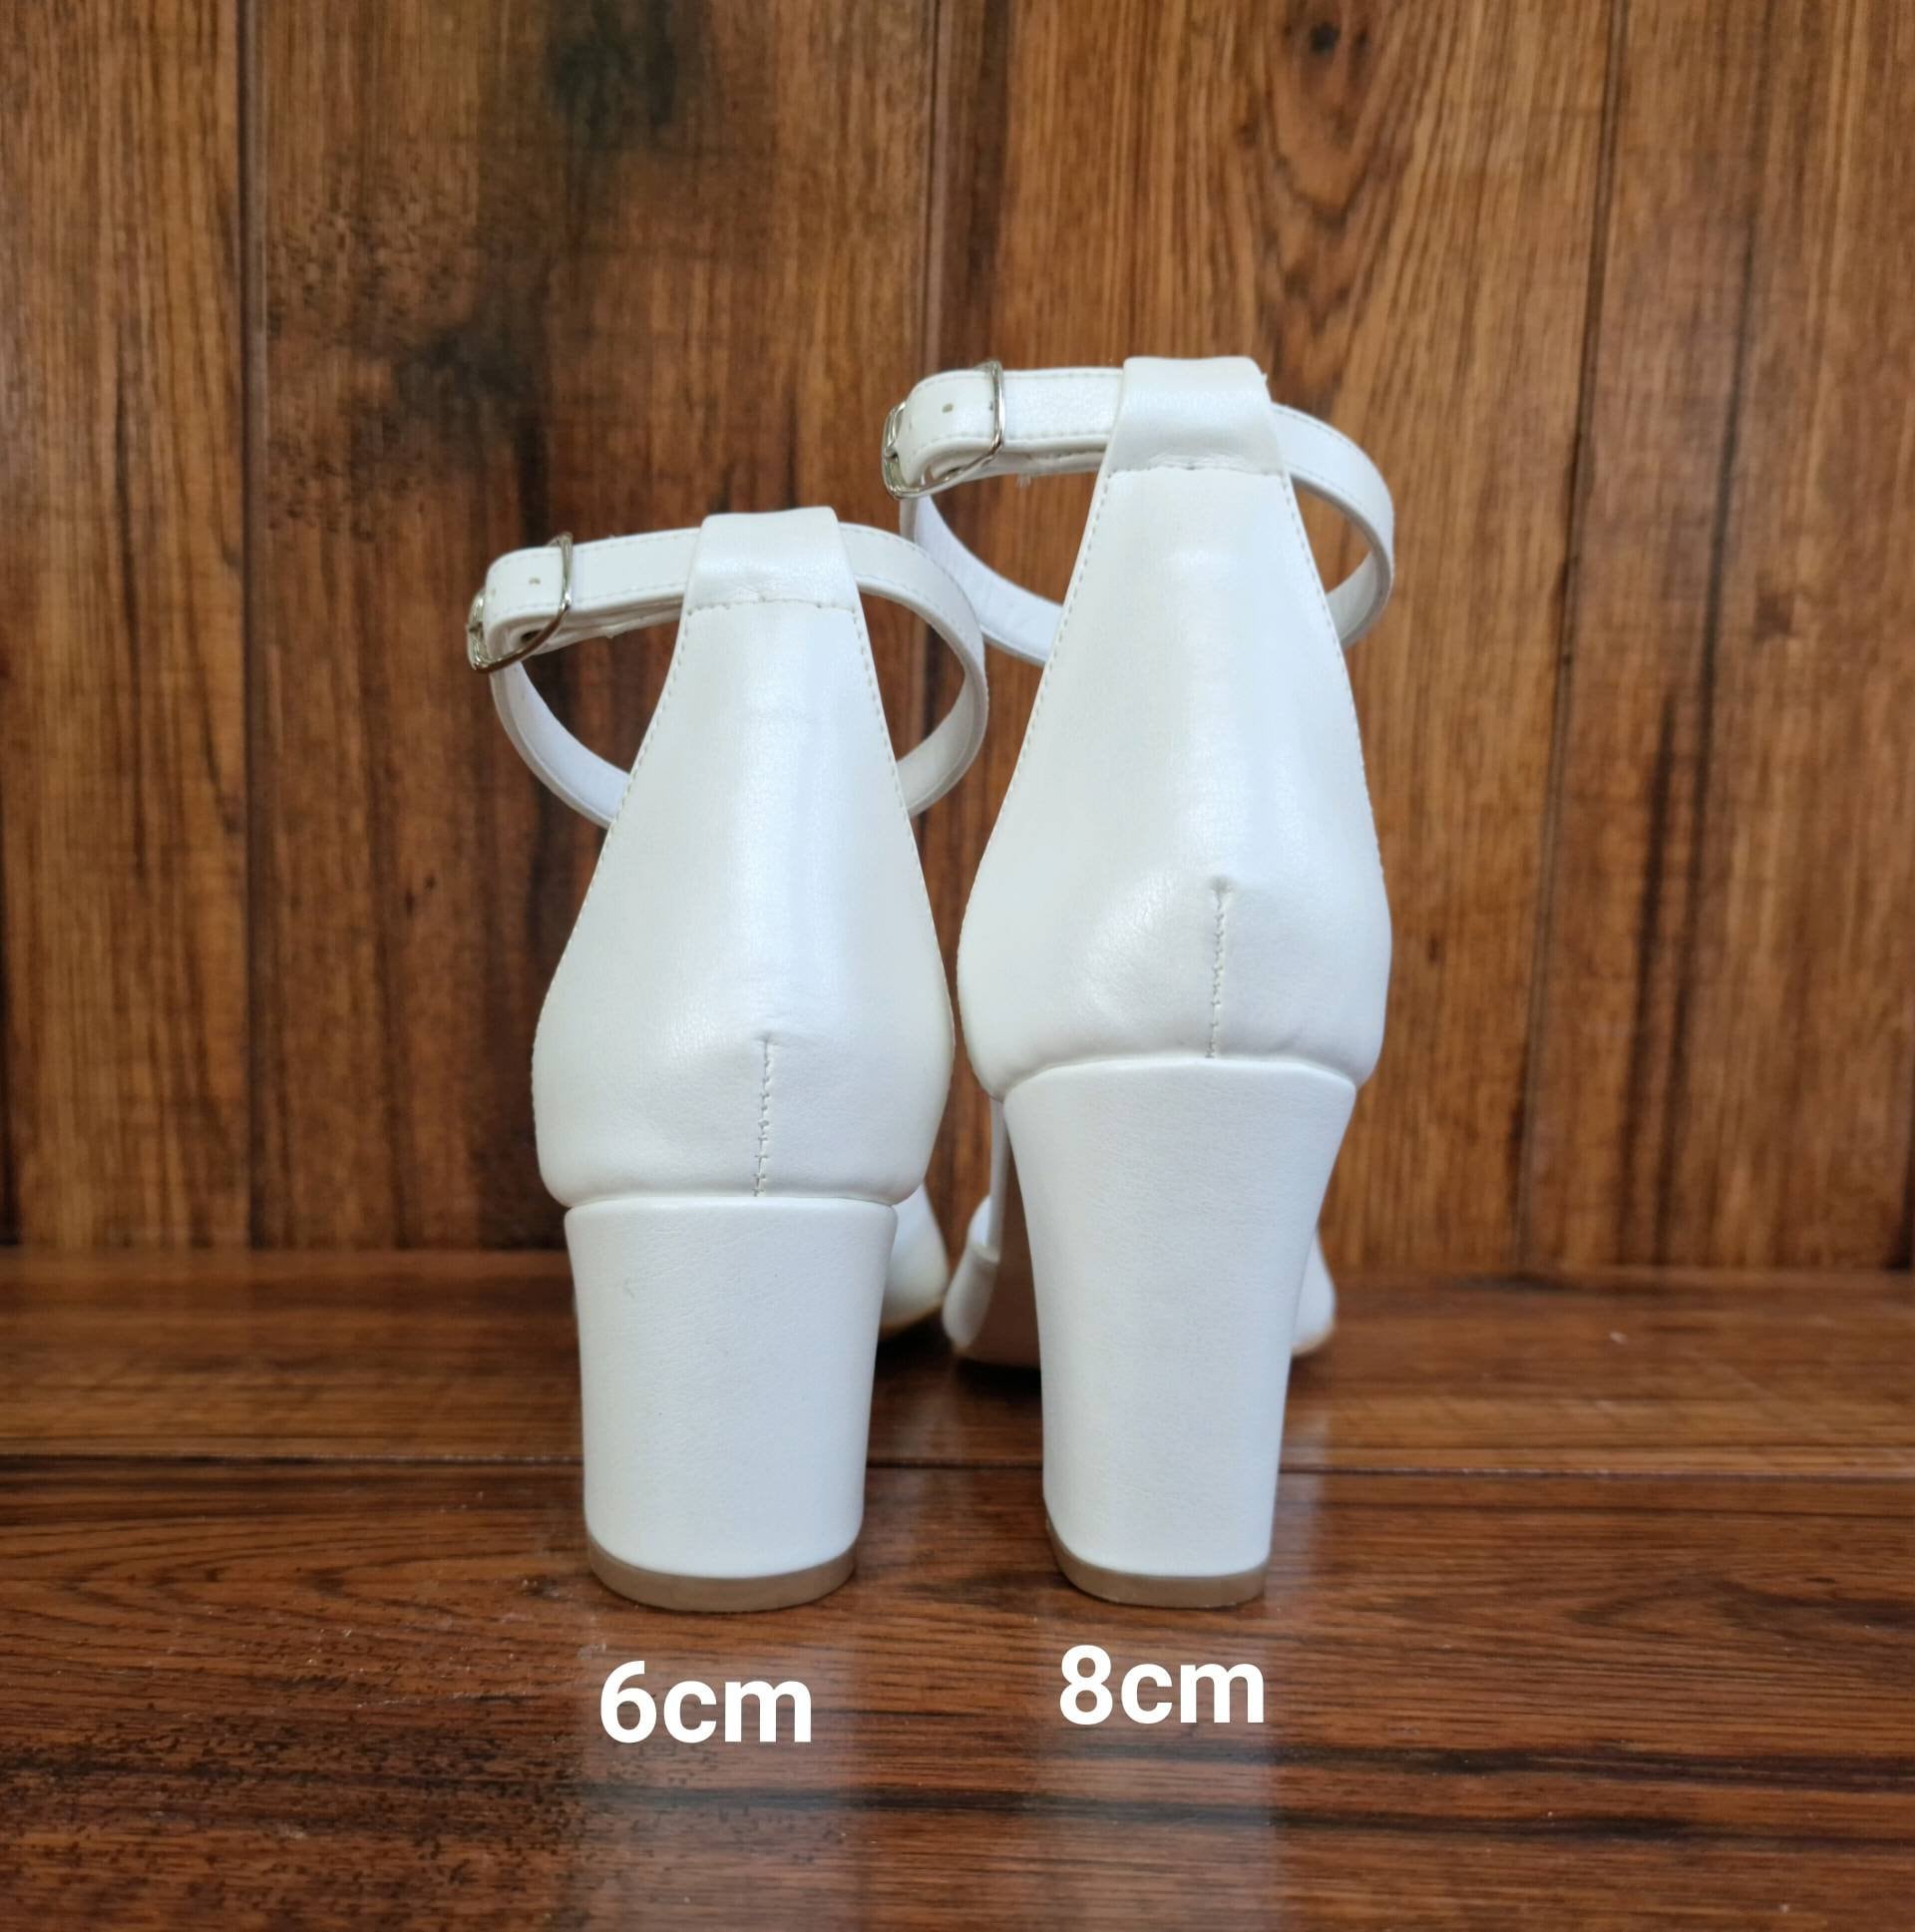 WHITE WEDGE HEELS, Ankle-wrap Sandals, Vegan Leather Shoes, Ankle Strap  Wedges, Platform Wedge Shoes, White Wedding Sandals, Ladies Shoes -   Norway